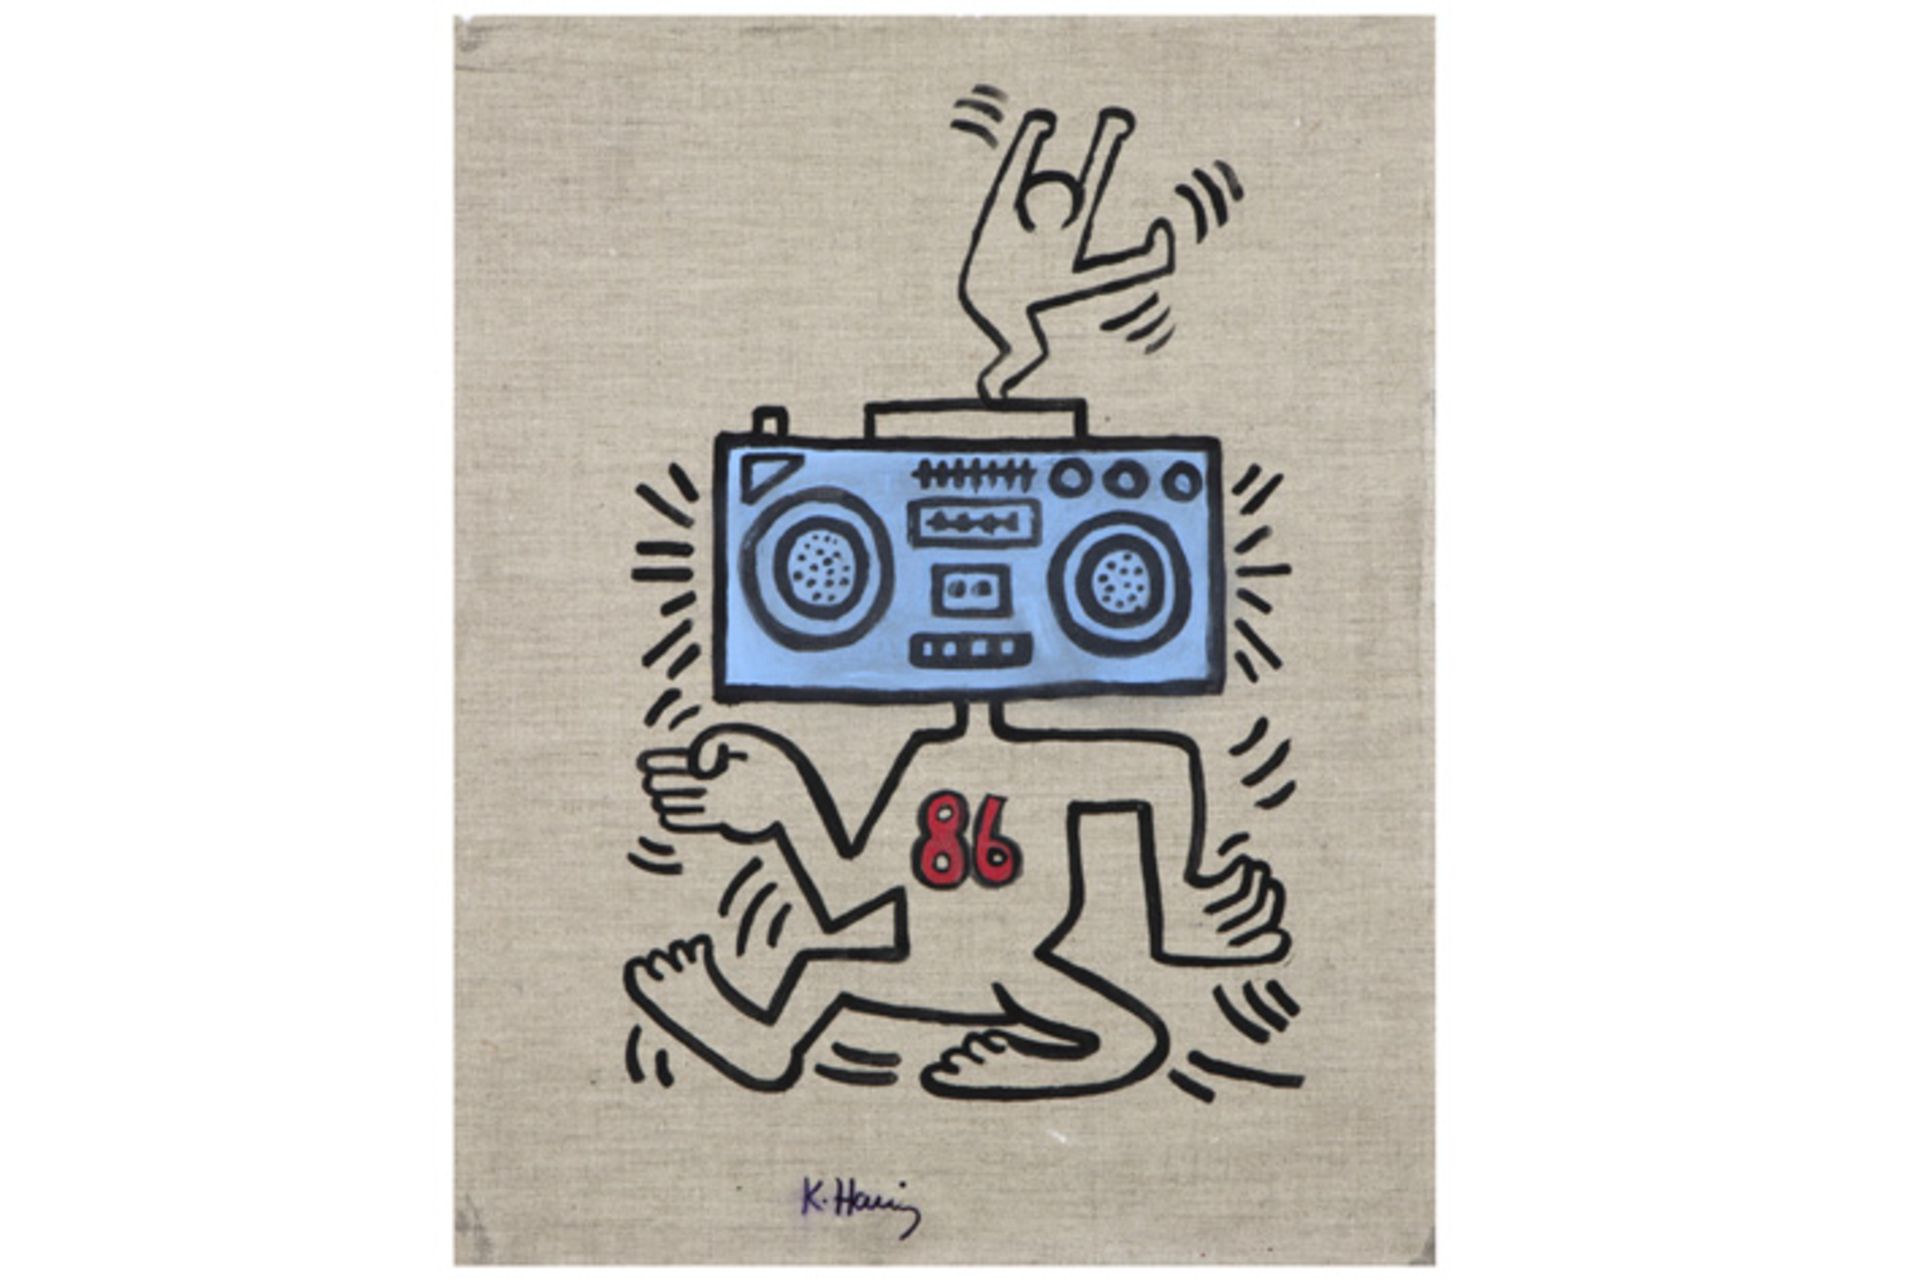 Keith Haring signed "Radioman" mixed media on canvas (on board) - with on the back a provenance labe